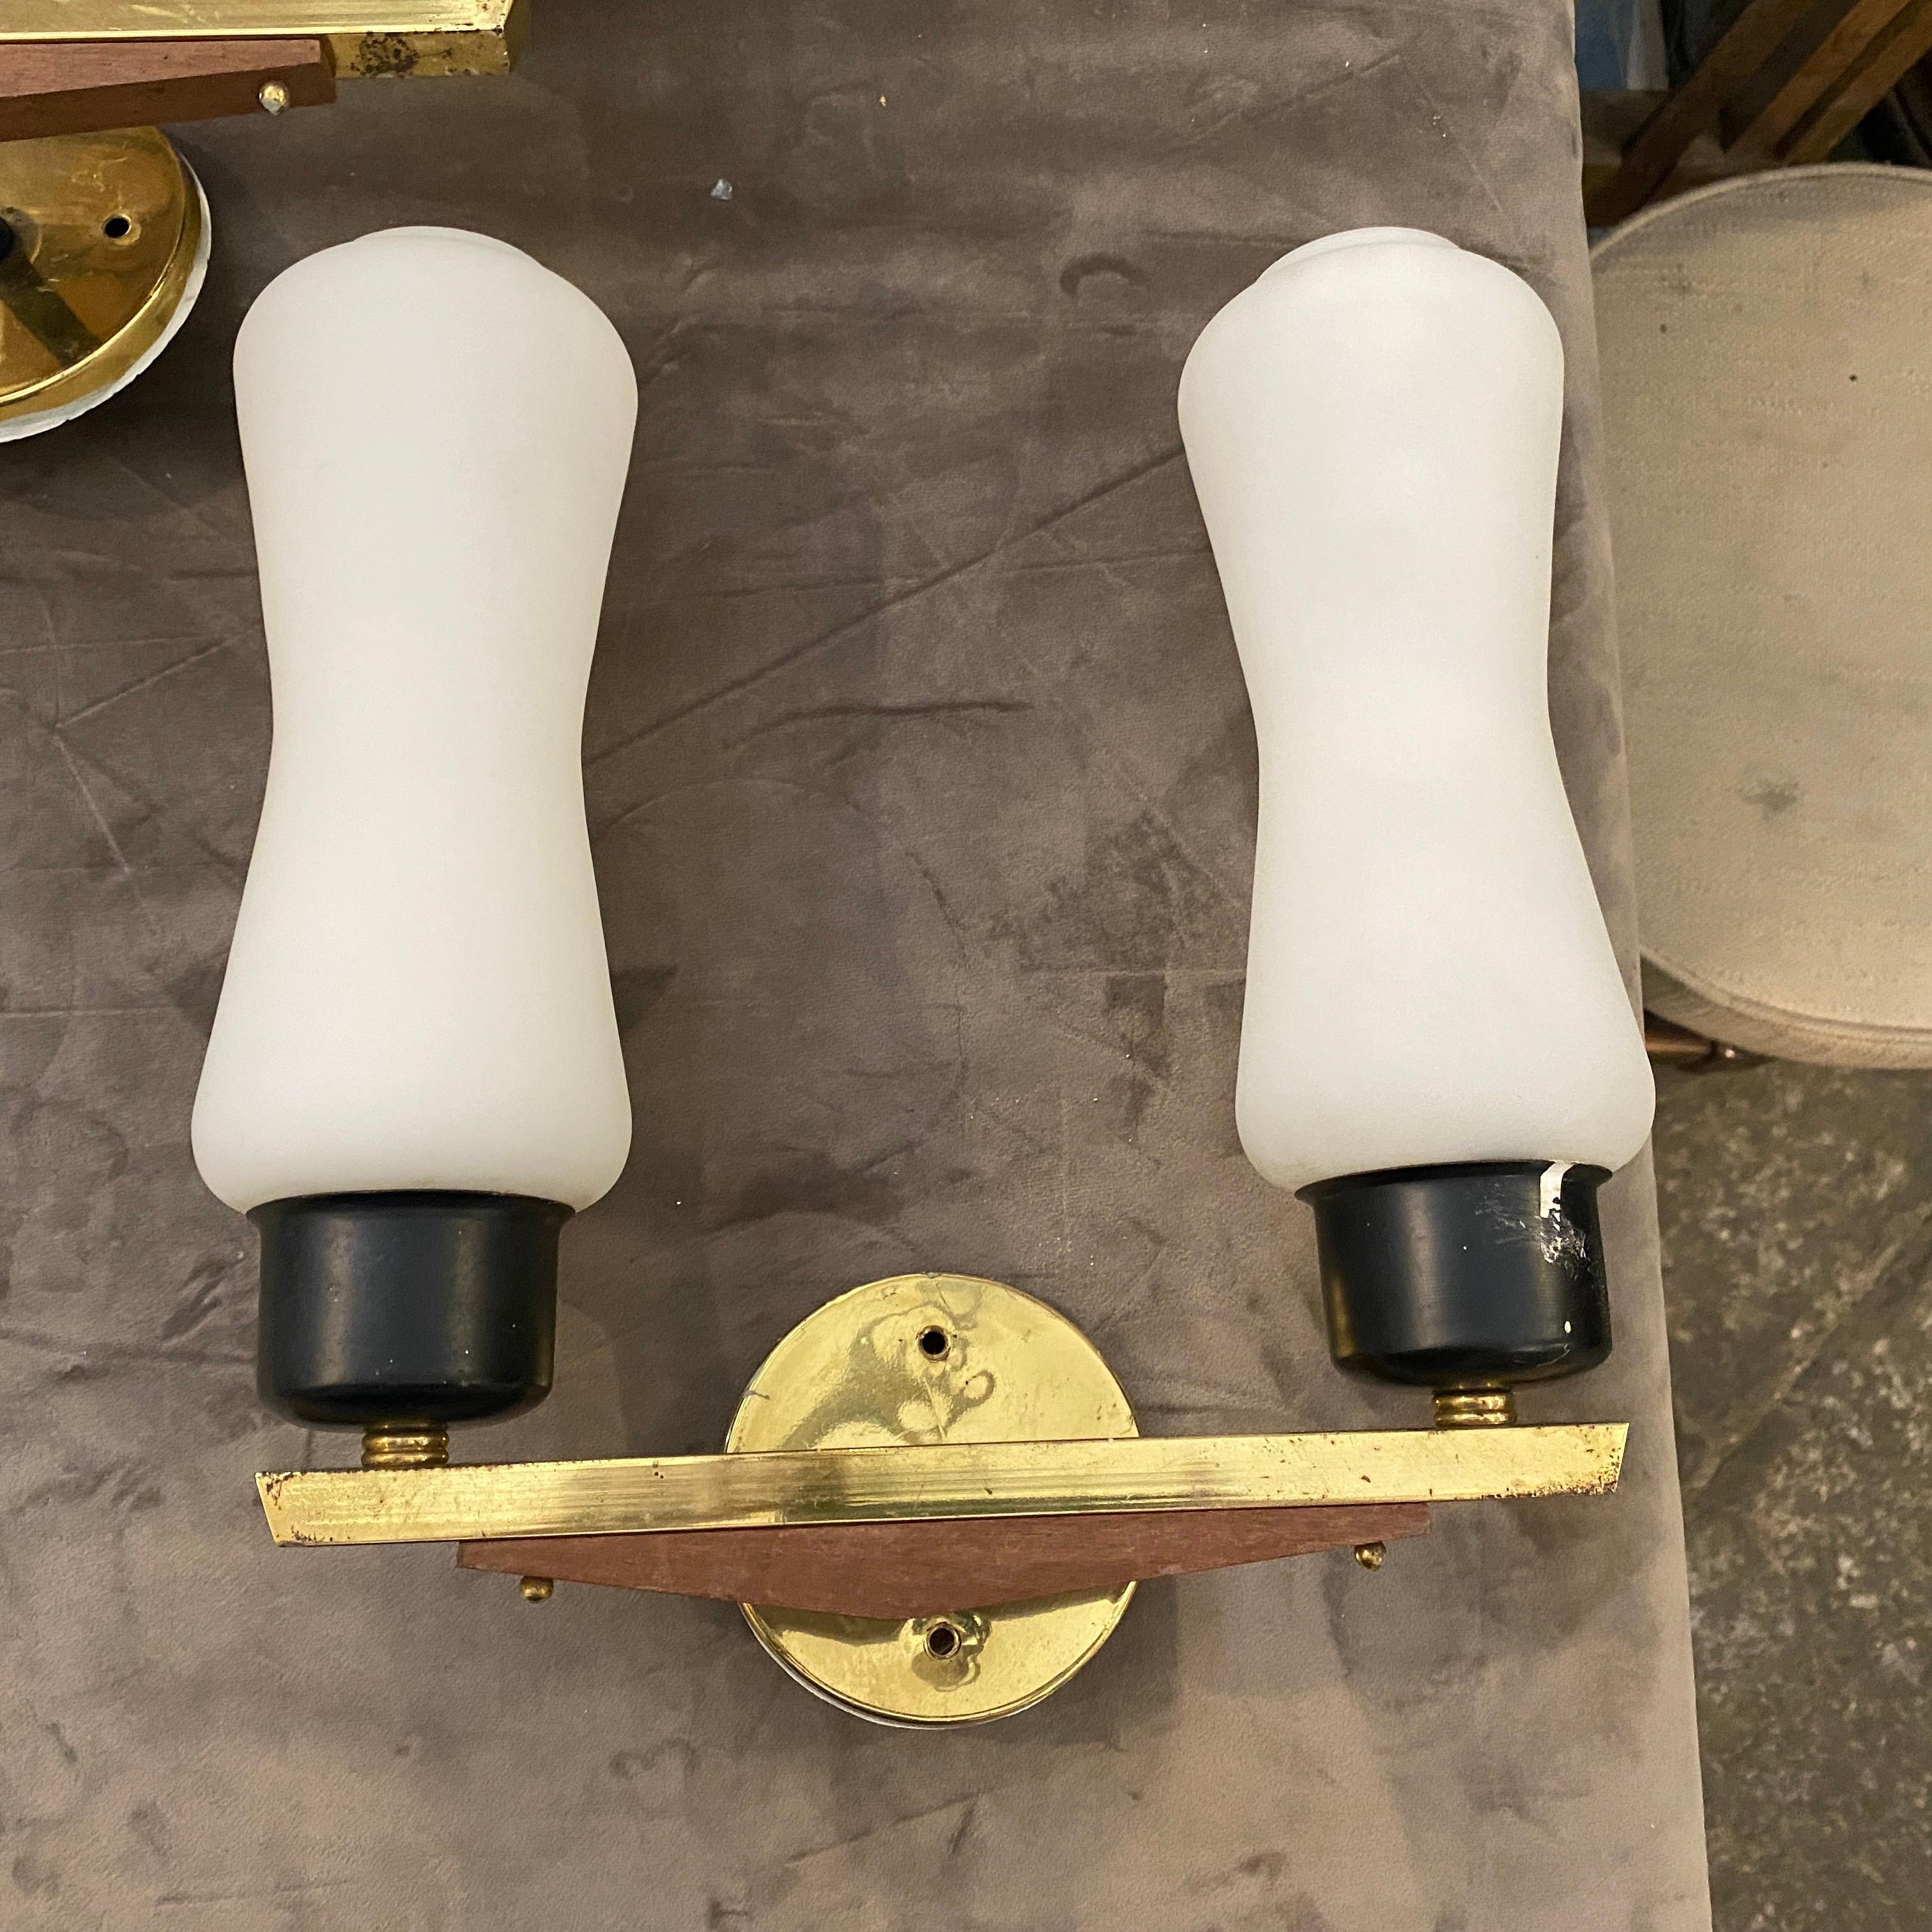 A pair of brass, teak and opaline glass wall sconces designed and manufactured in Italy in the Fifties in the manner of Stilnovo. They work both 110-240 volt and need regular e14 bulbs. Original conditions gives them a lovely vintage look.
These